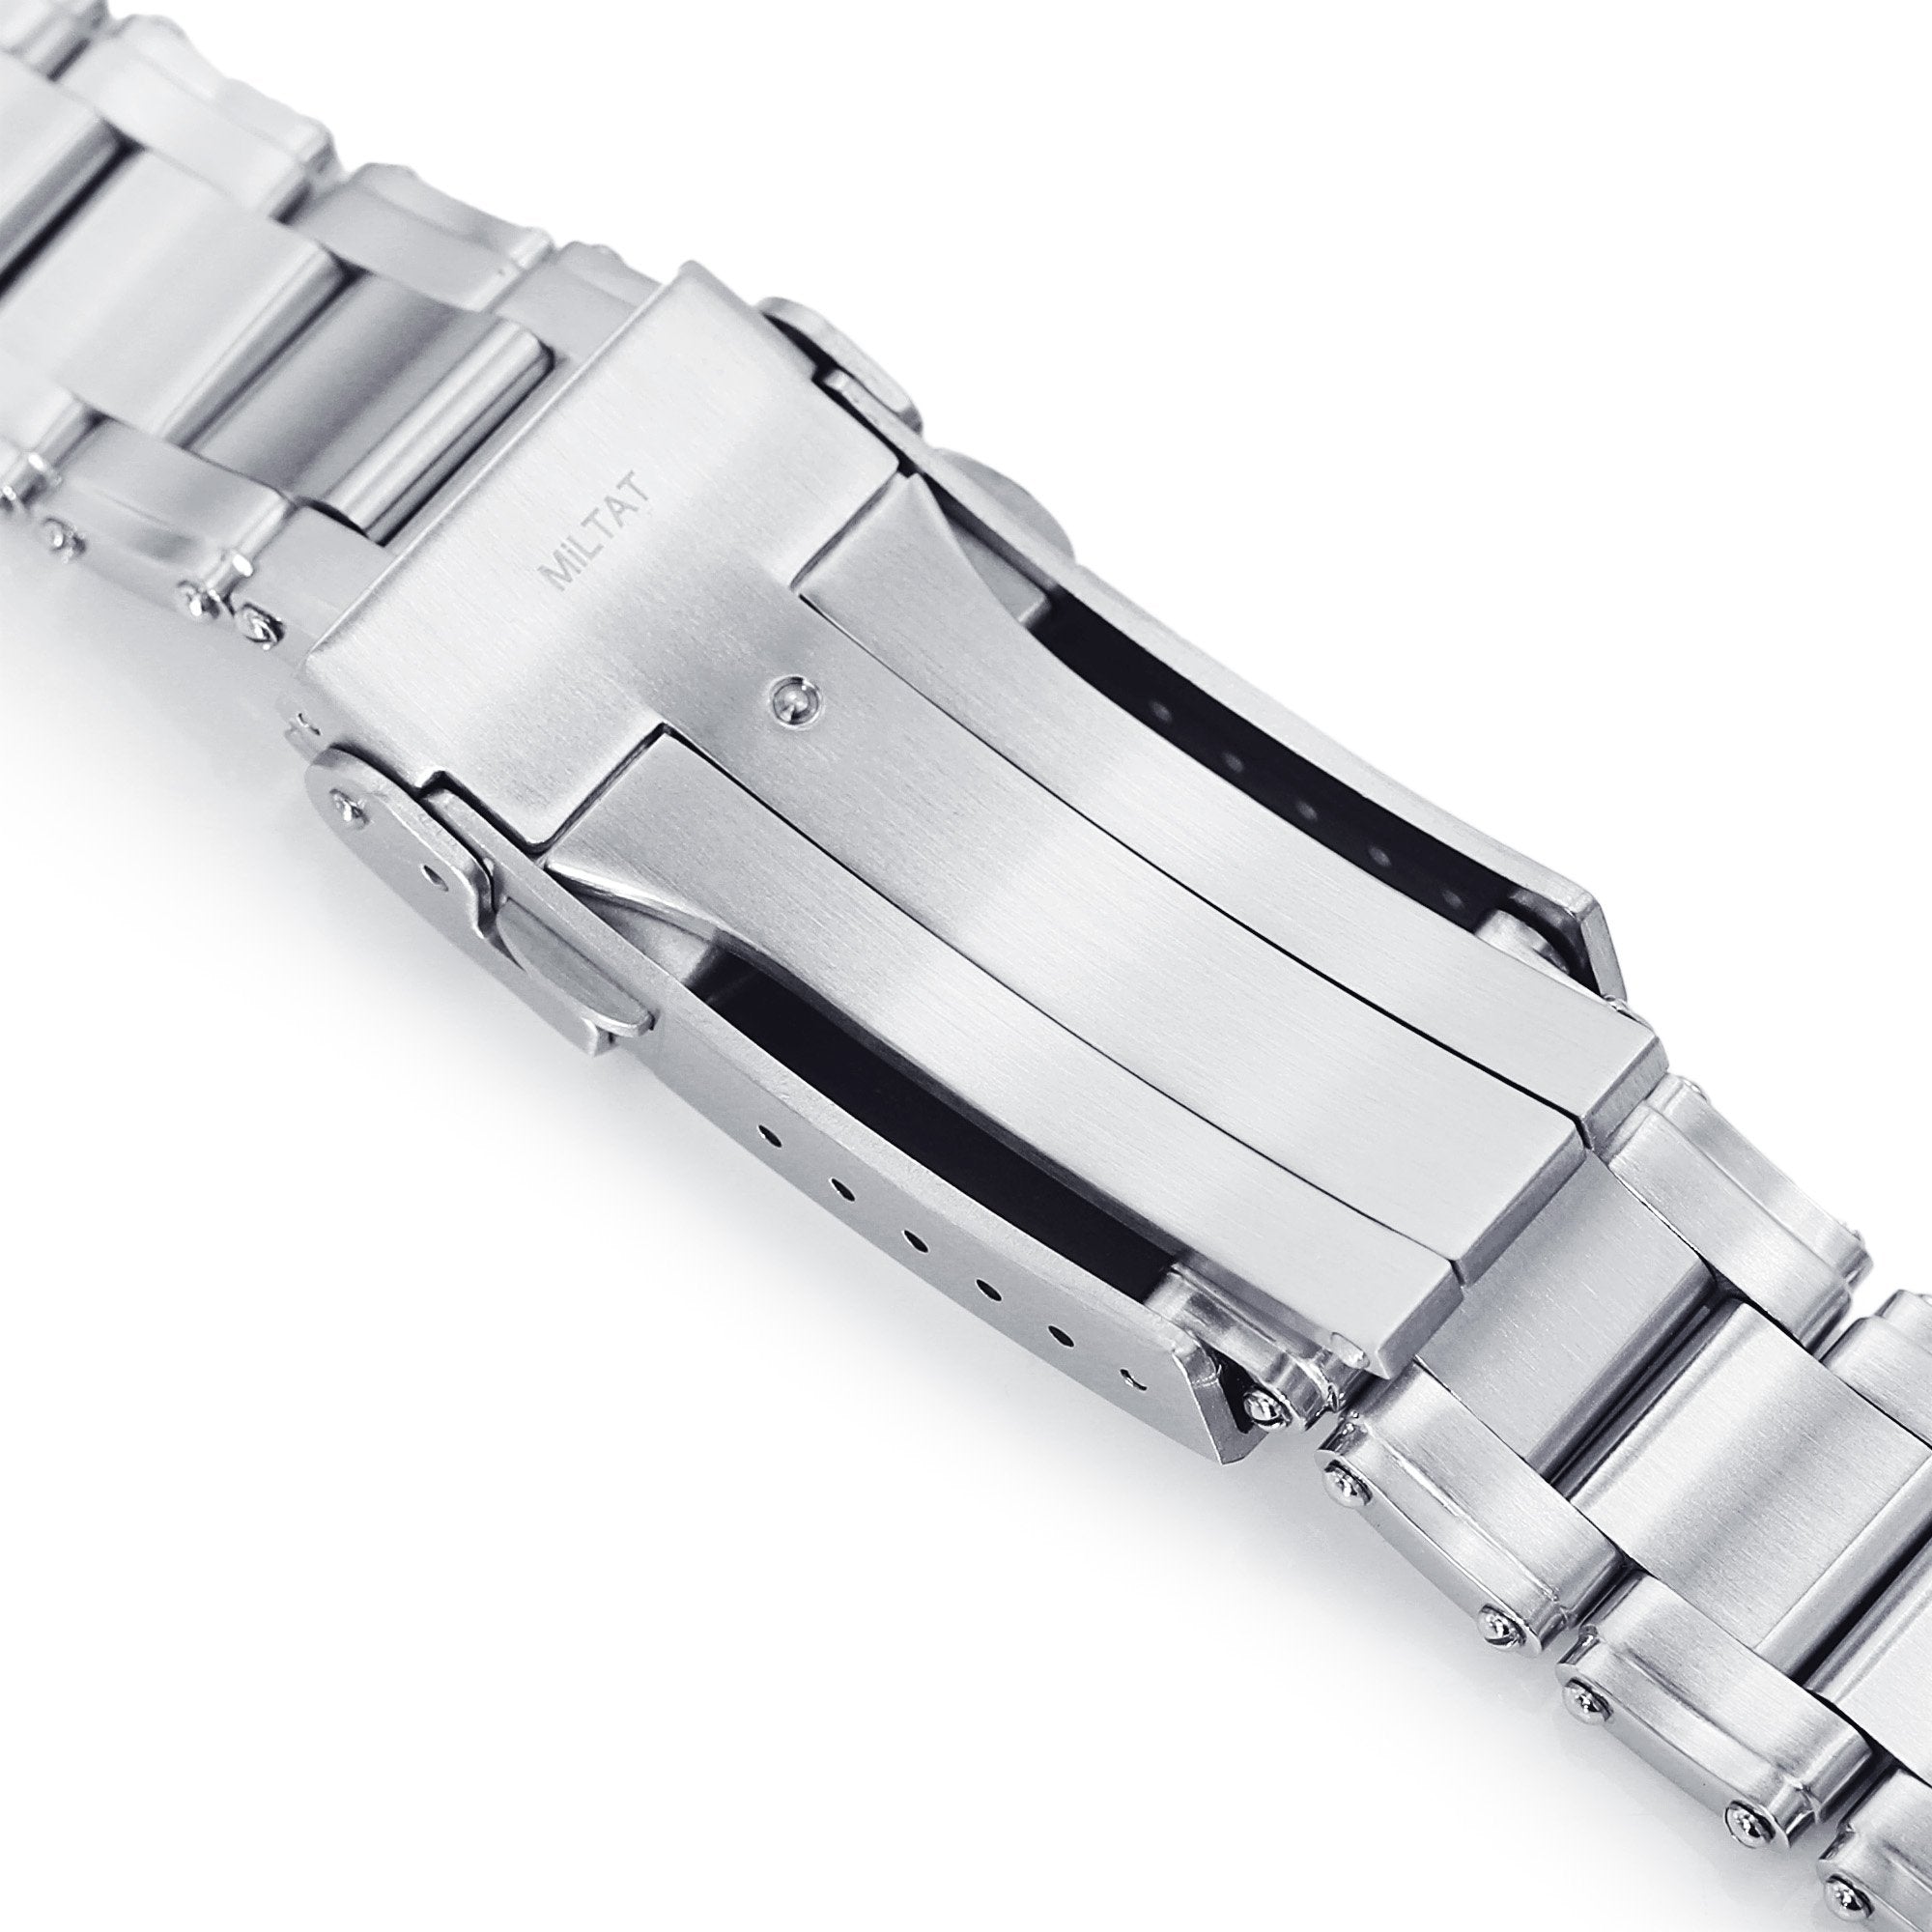 22mm Metabind 316L Stainless Steel Watch Bracelet for Seiko new Turtles SRP777 Brushed and Polished V-Clasp Strapcode Watch Bands